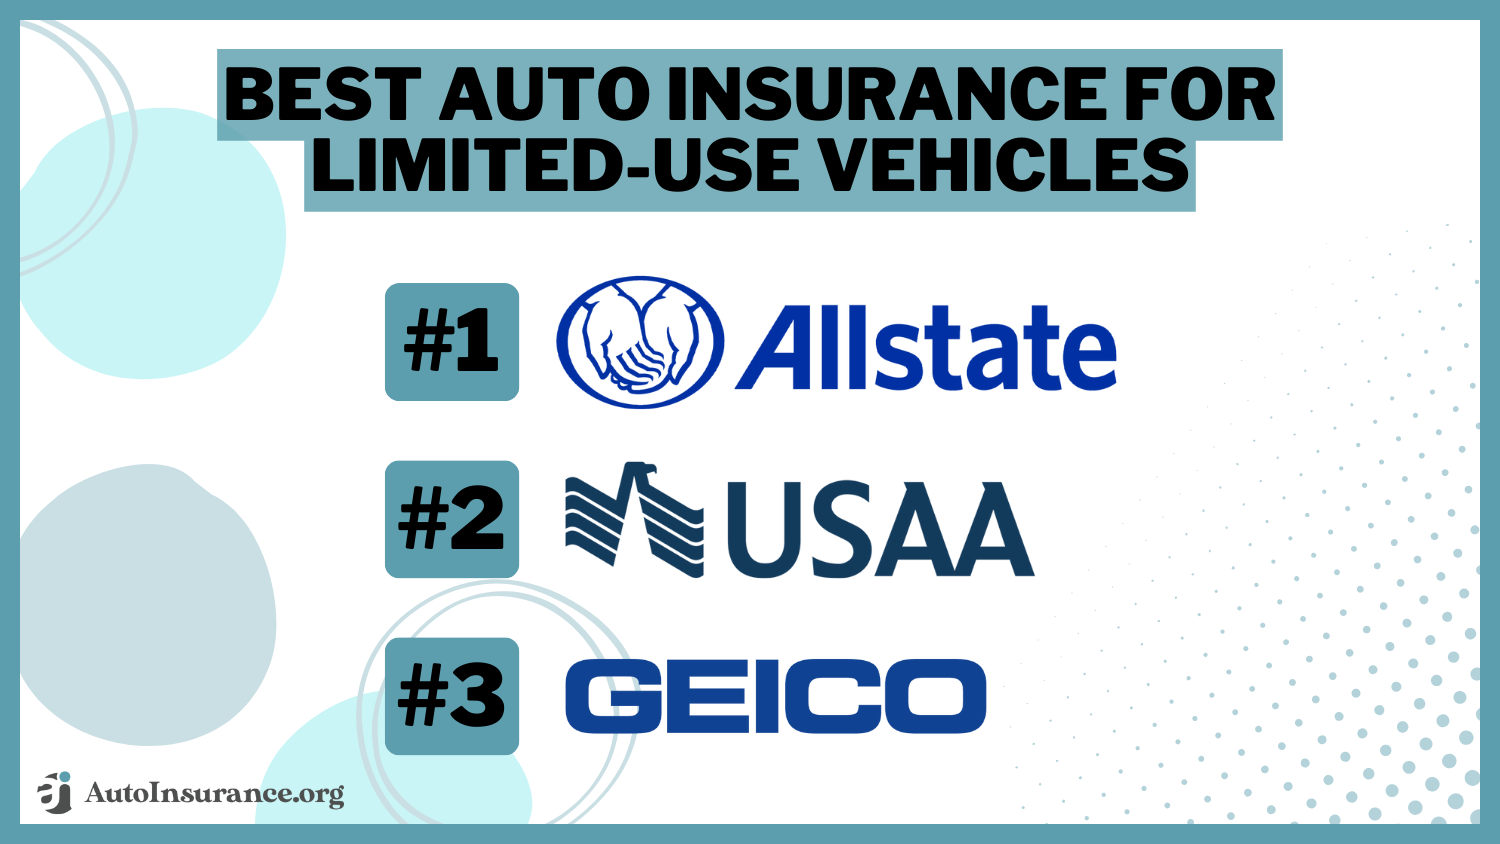 Best Auto Insurance for Limited-Use Vehicles: Allstate, USAA, and Geico